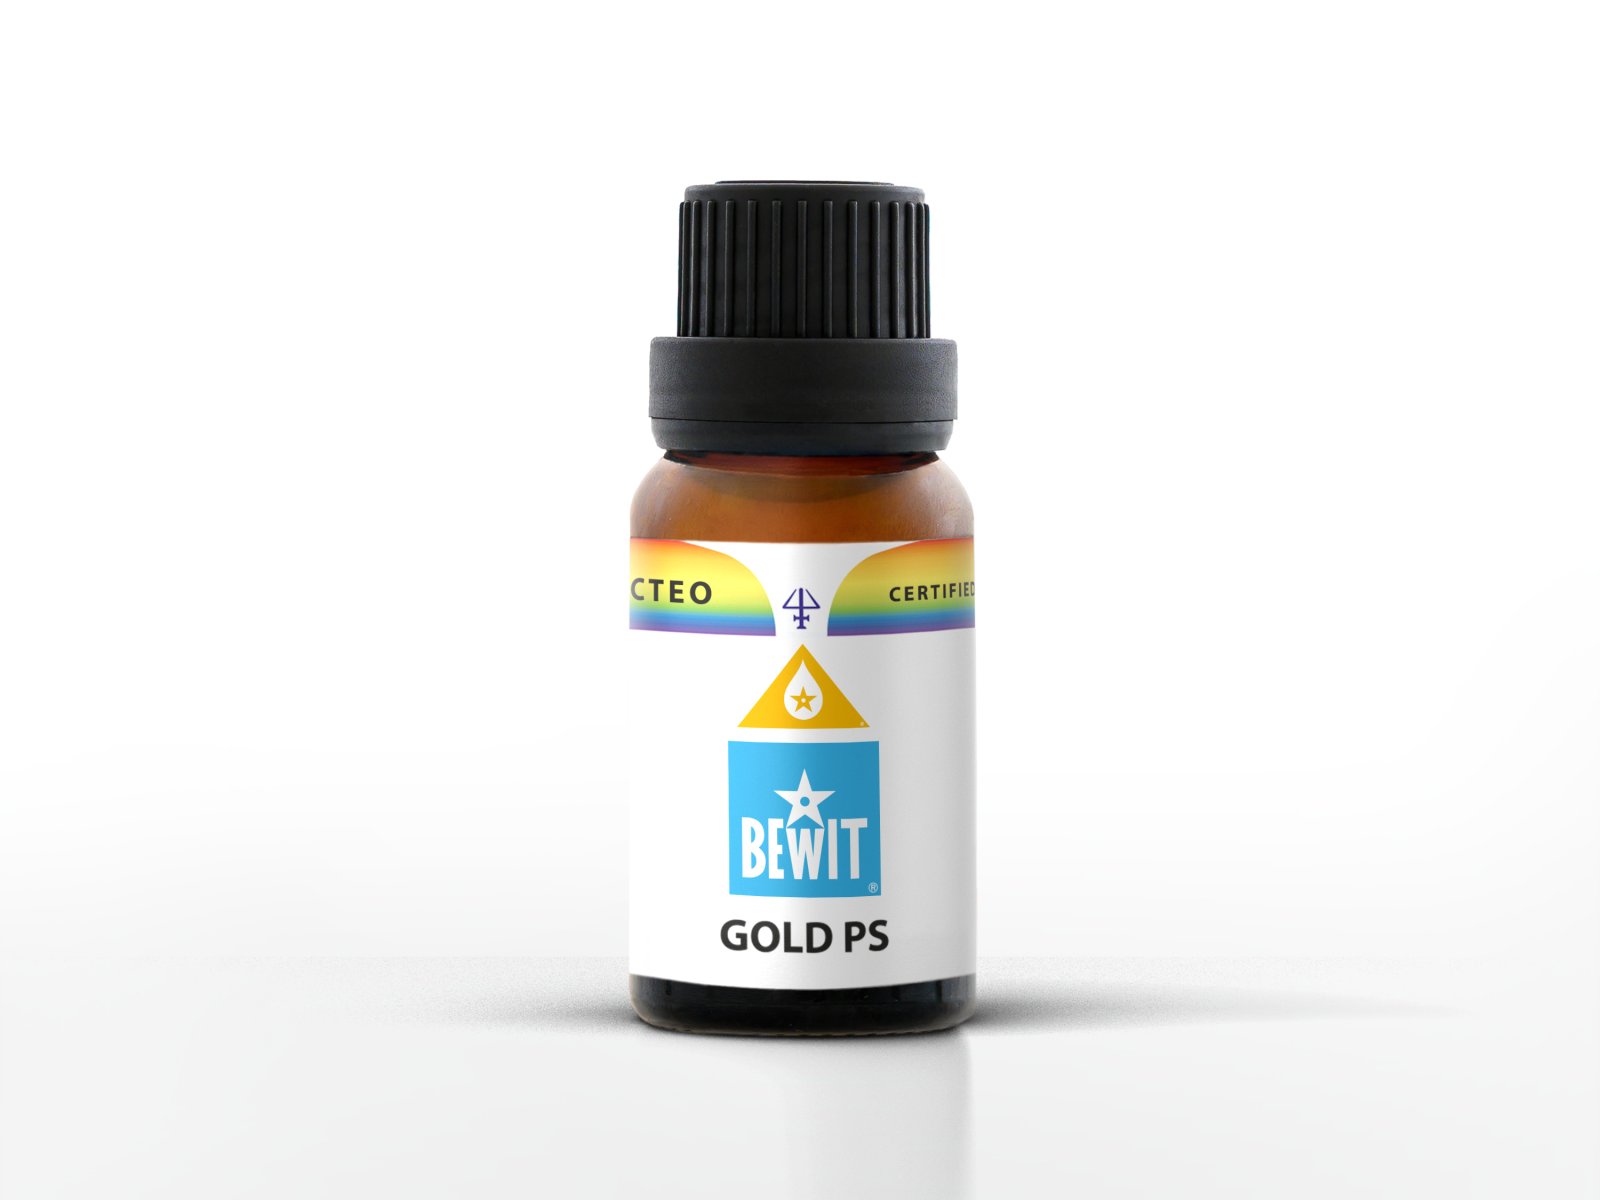 BEWIT GOLD PS - A blend of essential oils